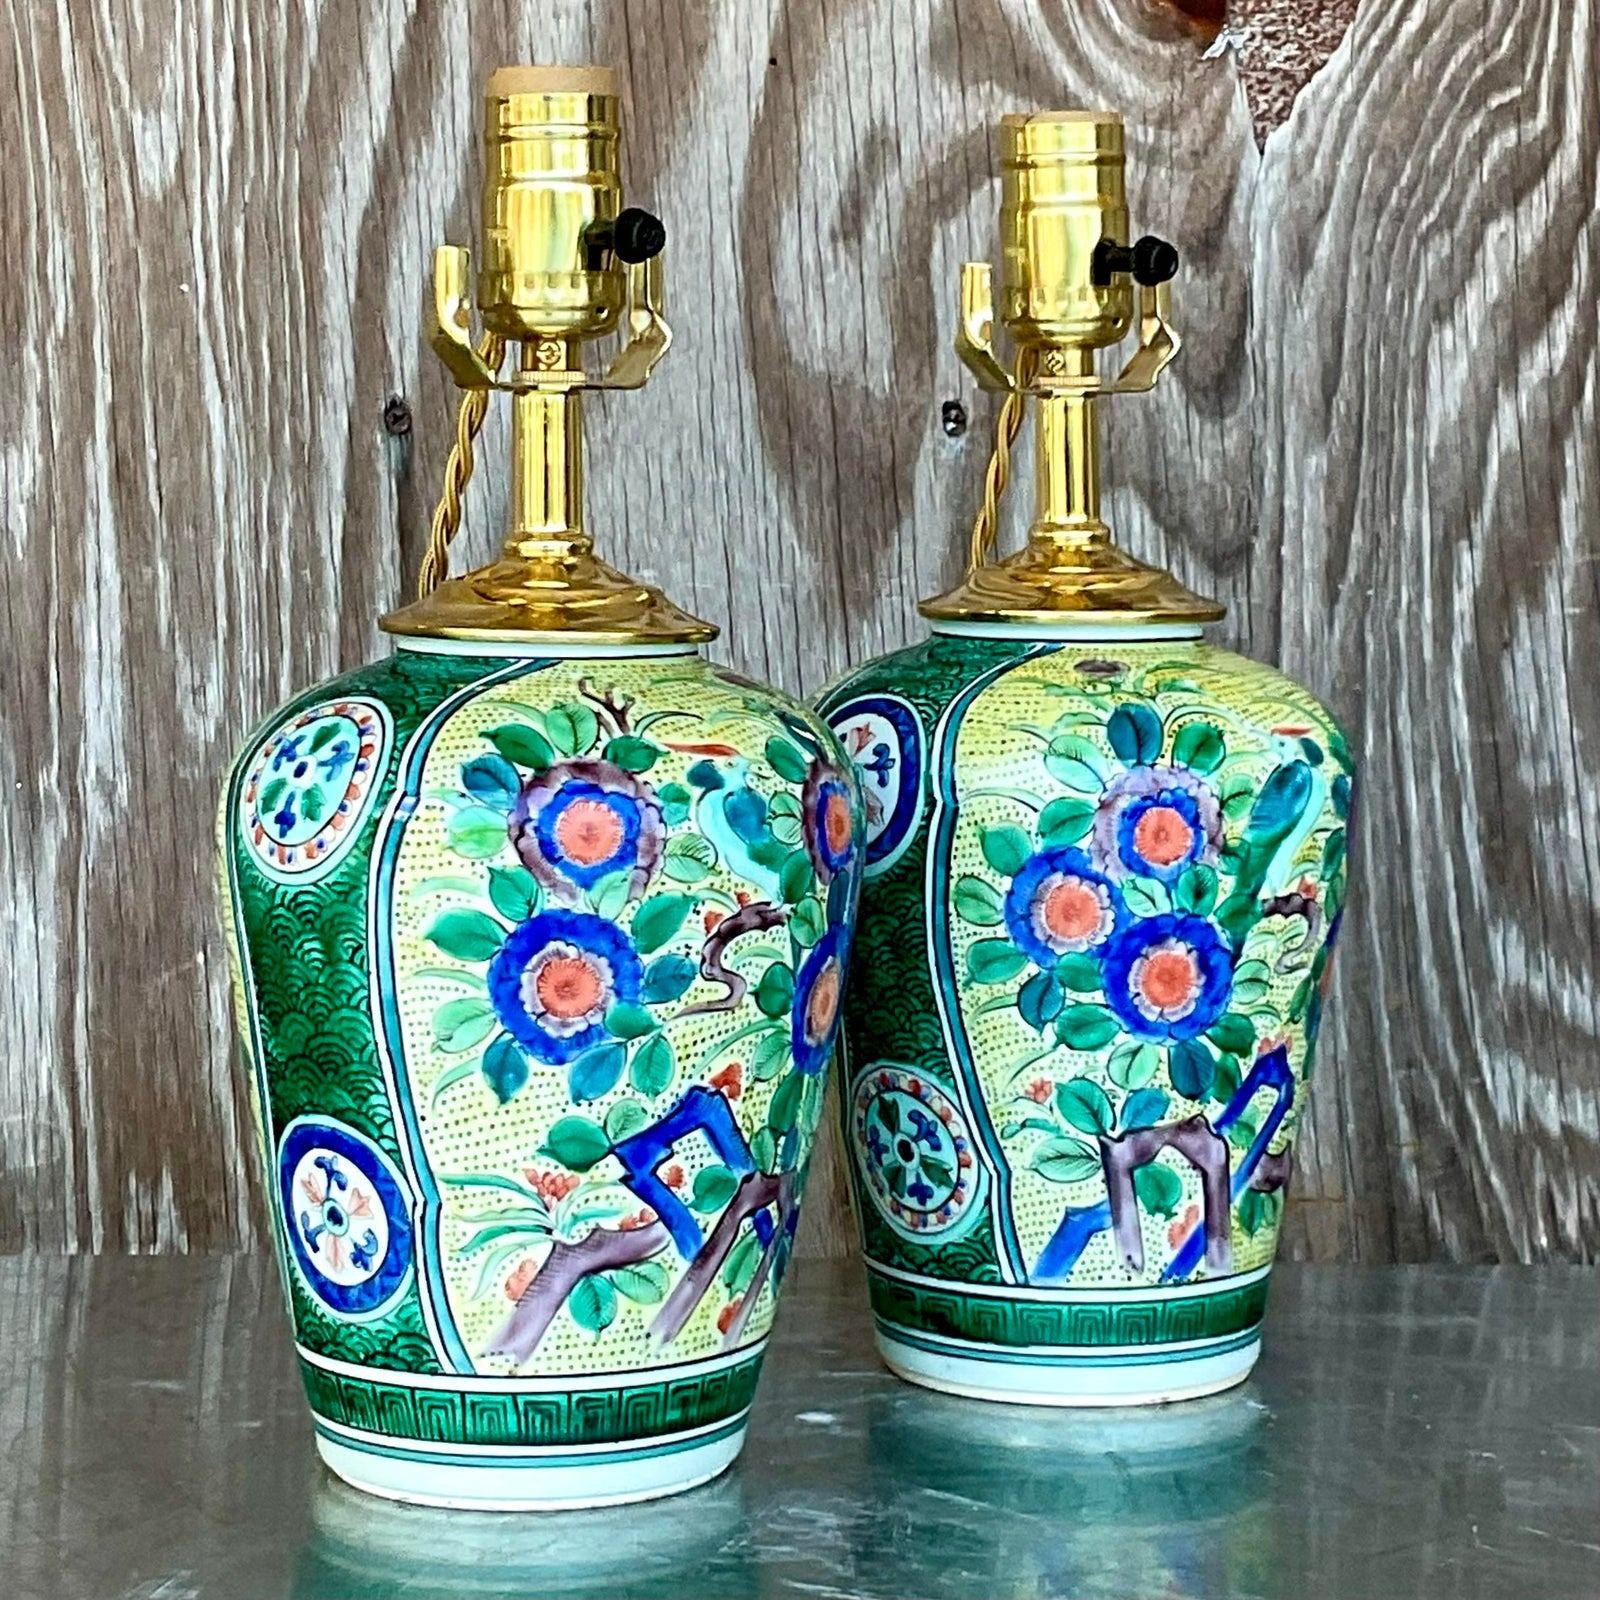 Vintage Asian Glazed Ceramic Floral Table Lamps - a Pair In Good Condition For Sale In west palm beach, FL